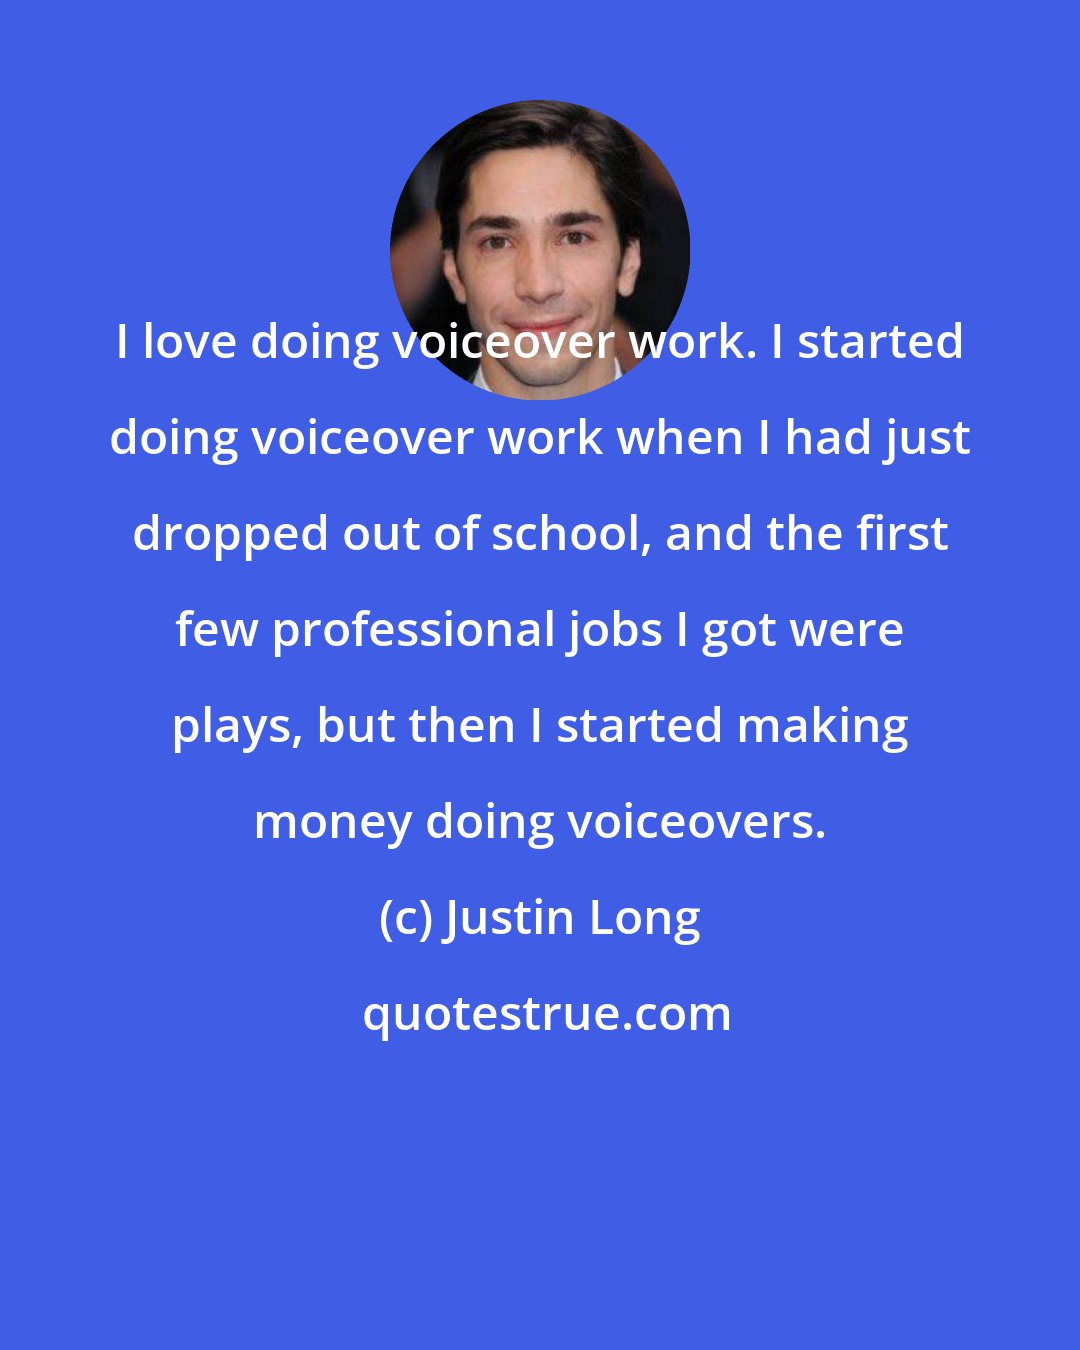 Justin Long: I love doing voiceover work. I started doing voiceover work when I had just dropped out of school, and the first few professional jobs I got were plays, but then I started making money doing voiceovers.